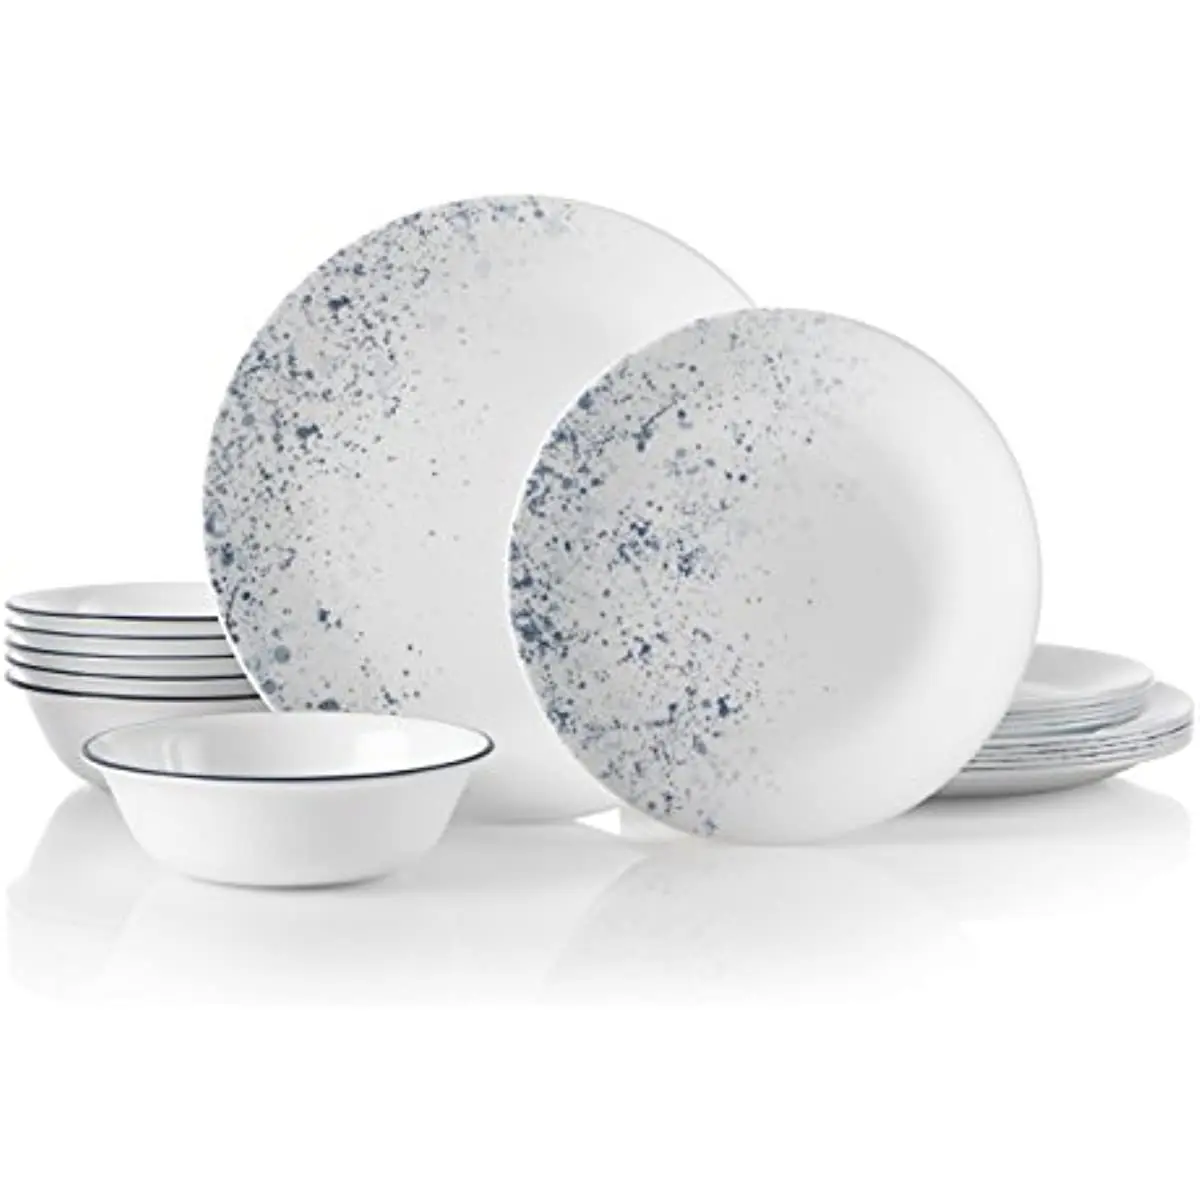 And Chip Resistant, Lightweight Round Plates And Bowls Set